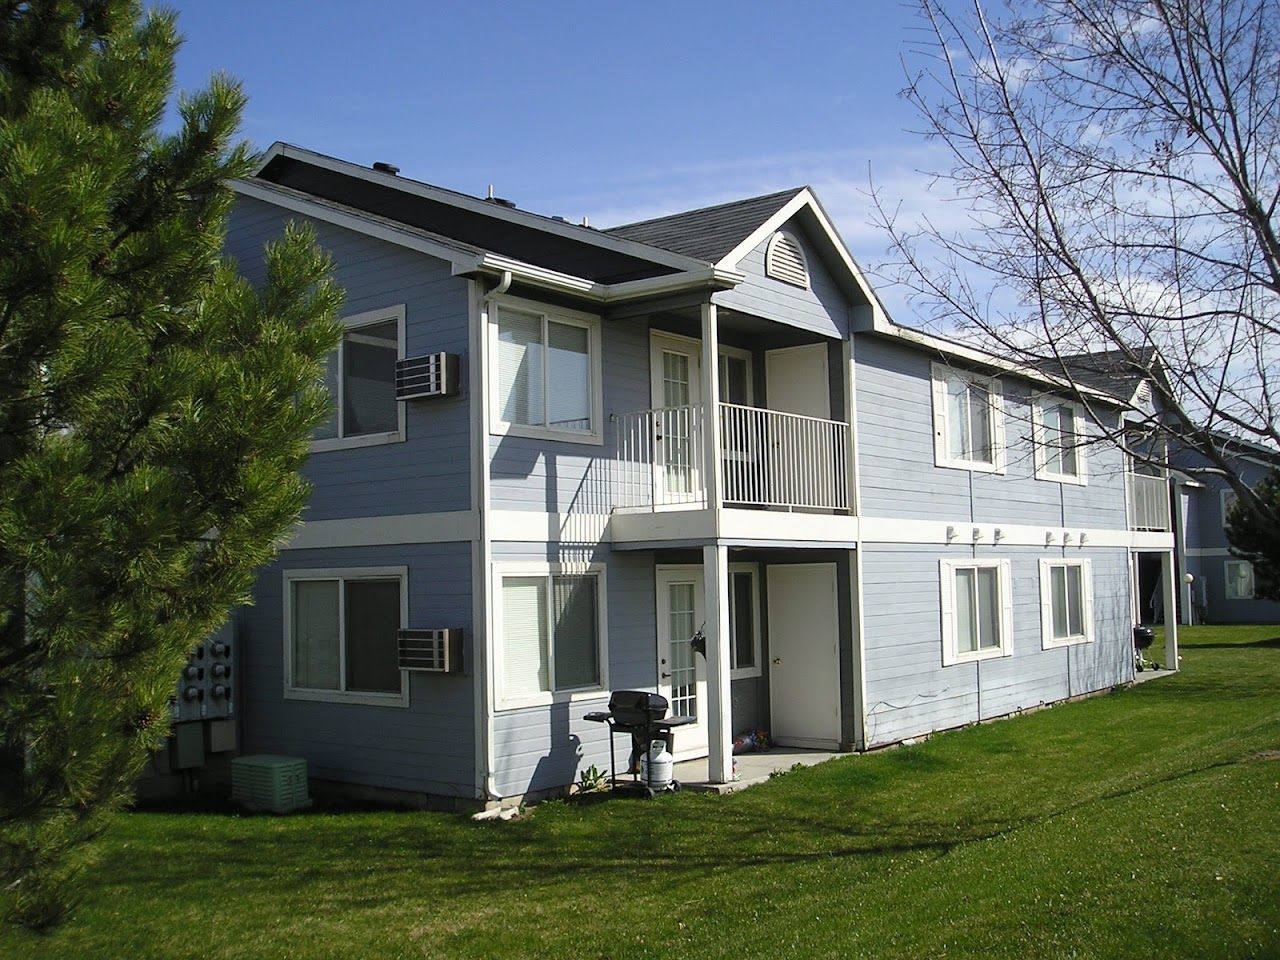 Photo of GALWAY. Affordable housing located at 2219 WEST KARCHER ROAD NAMPA, ID 83651